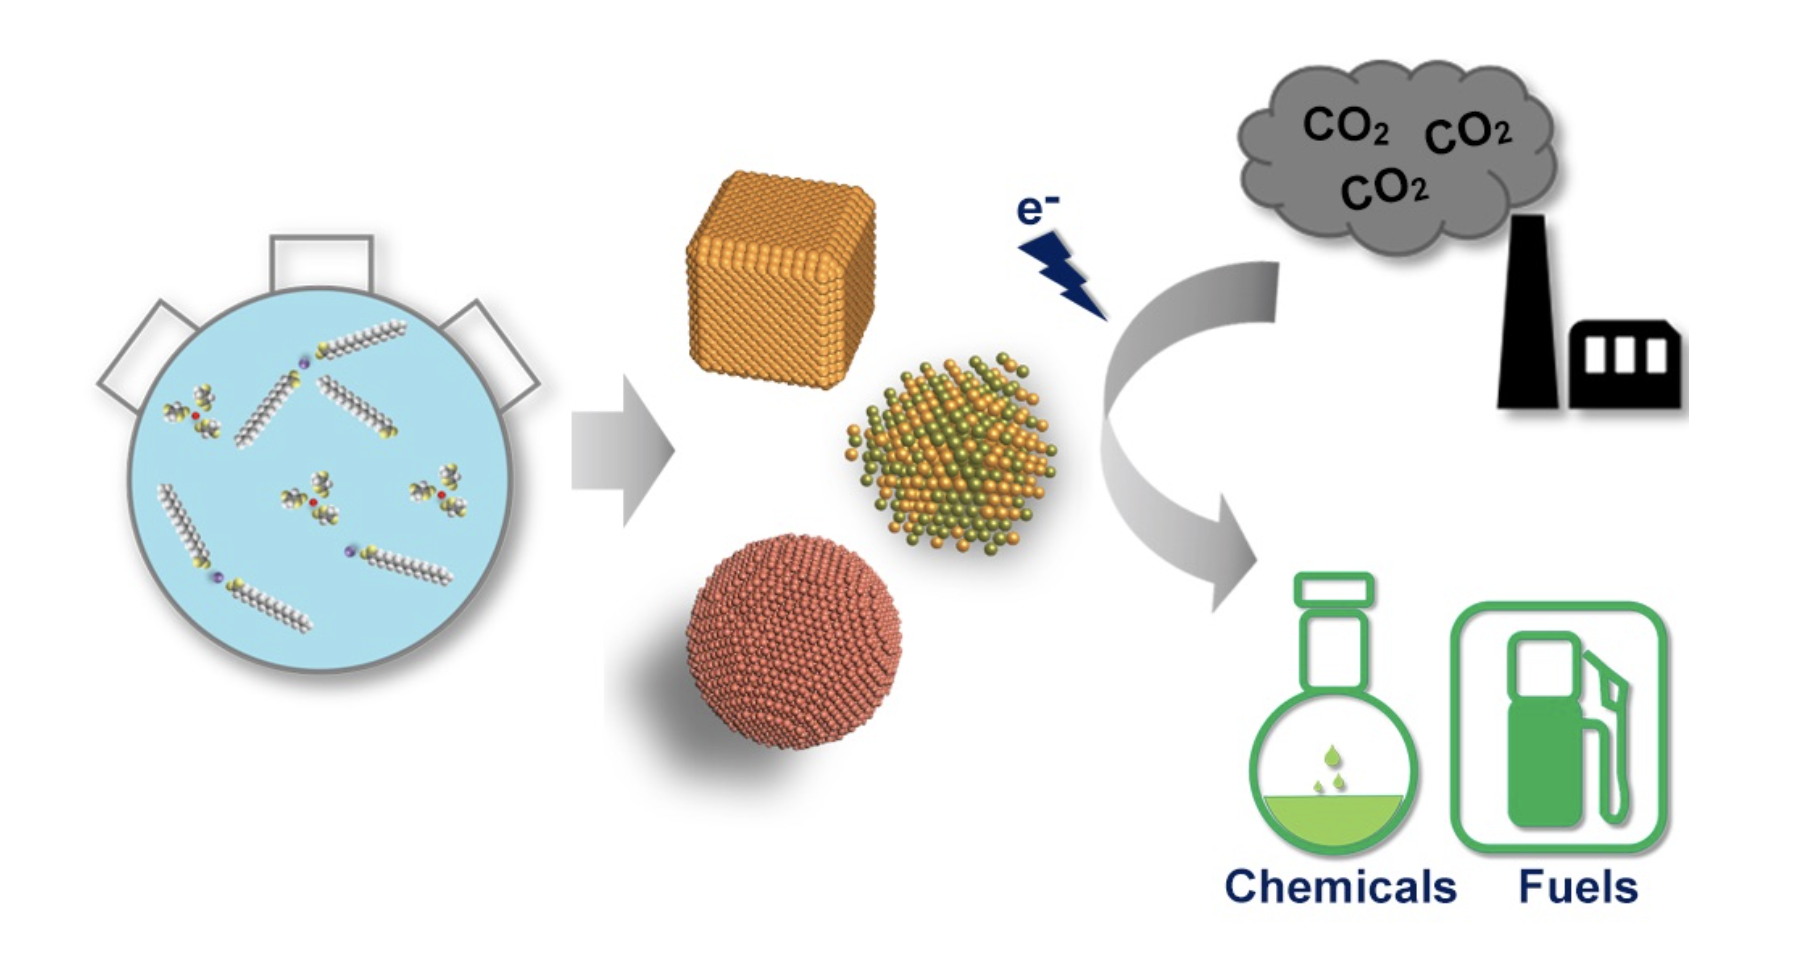 Molecular structures, CO2 emissions to chemical fuels